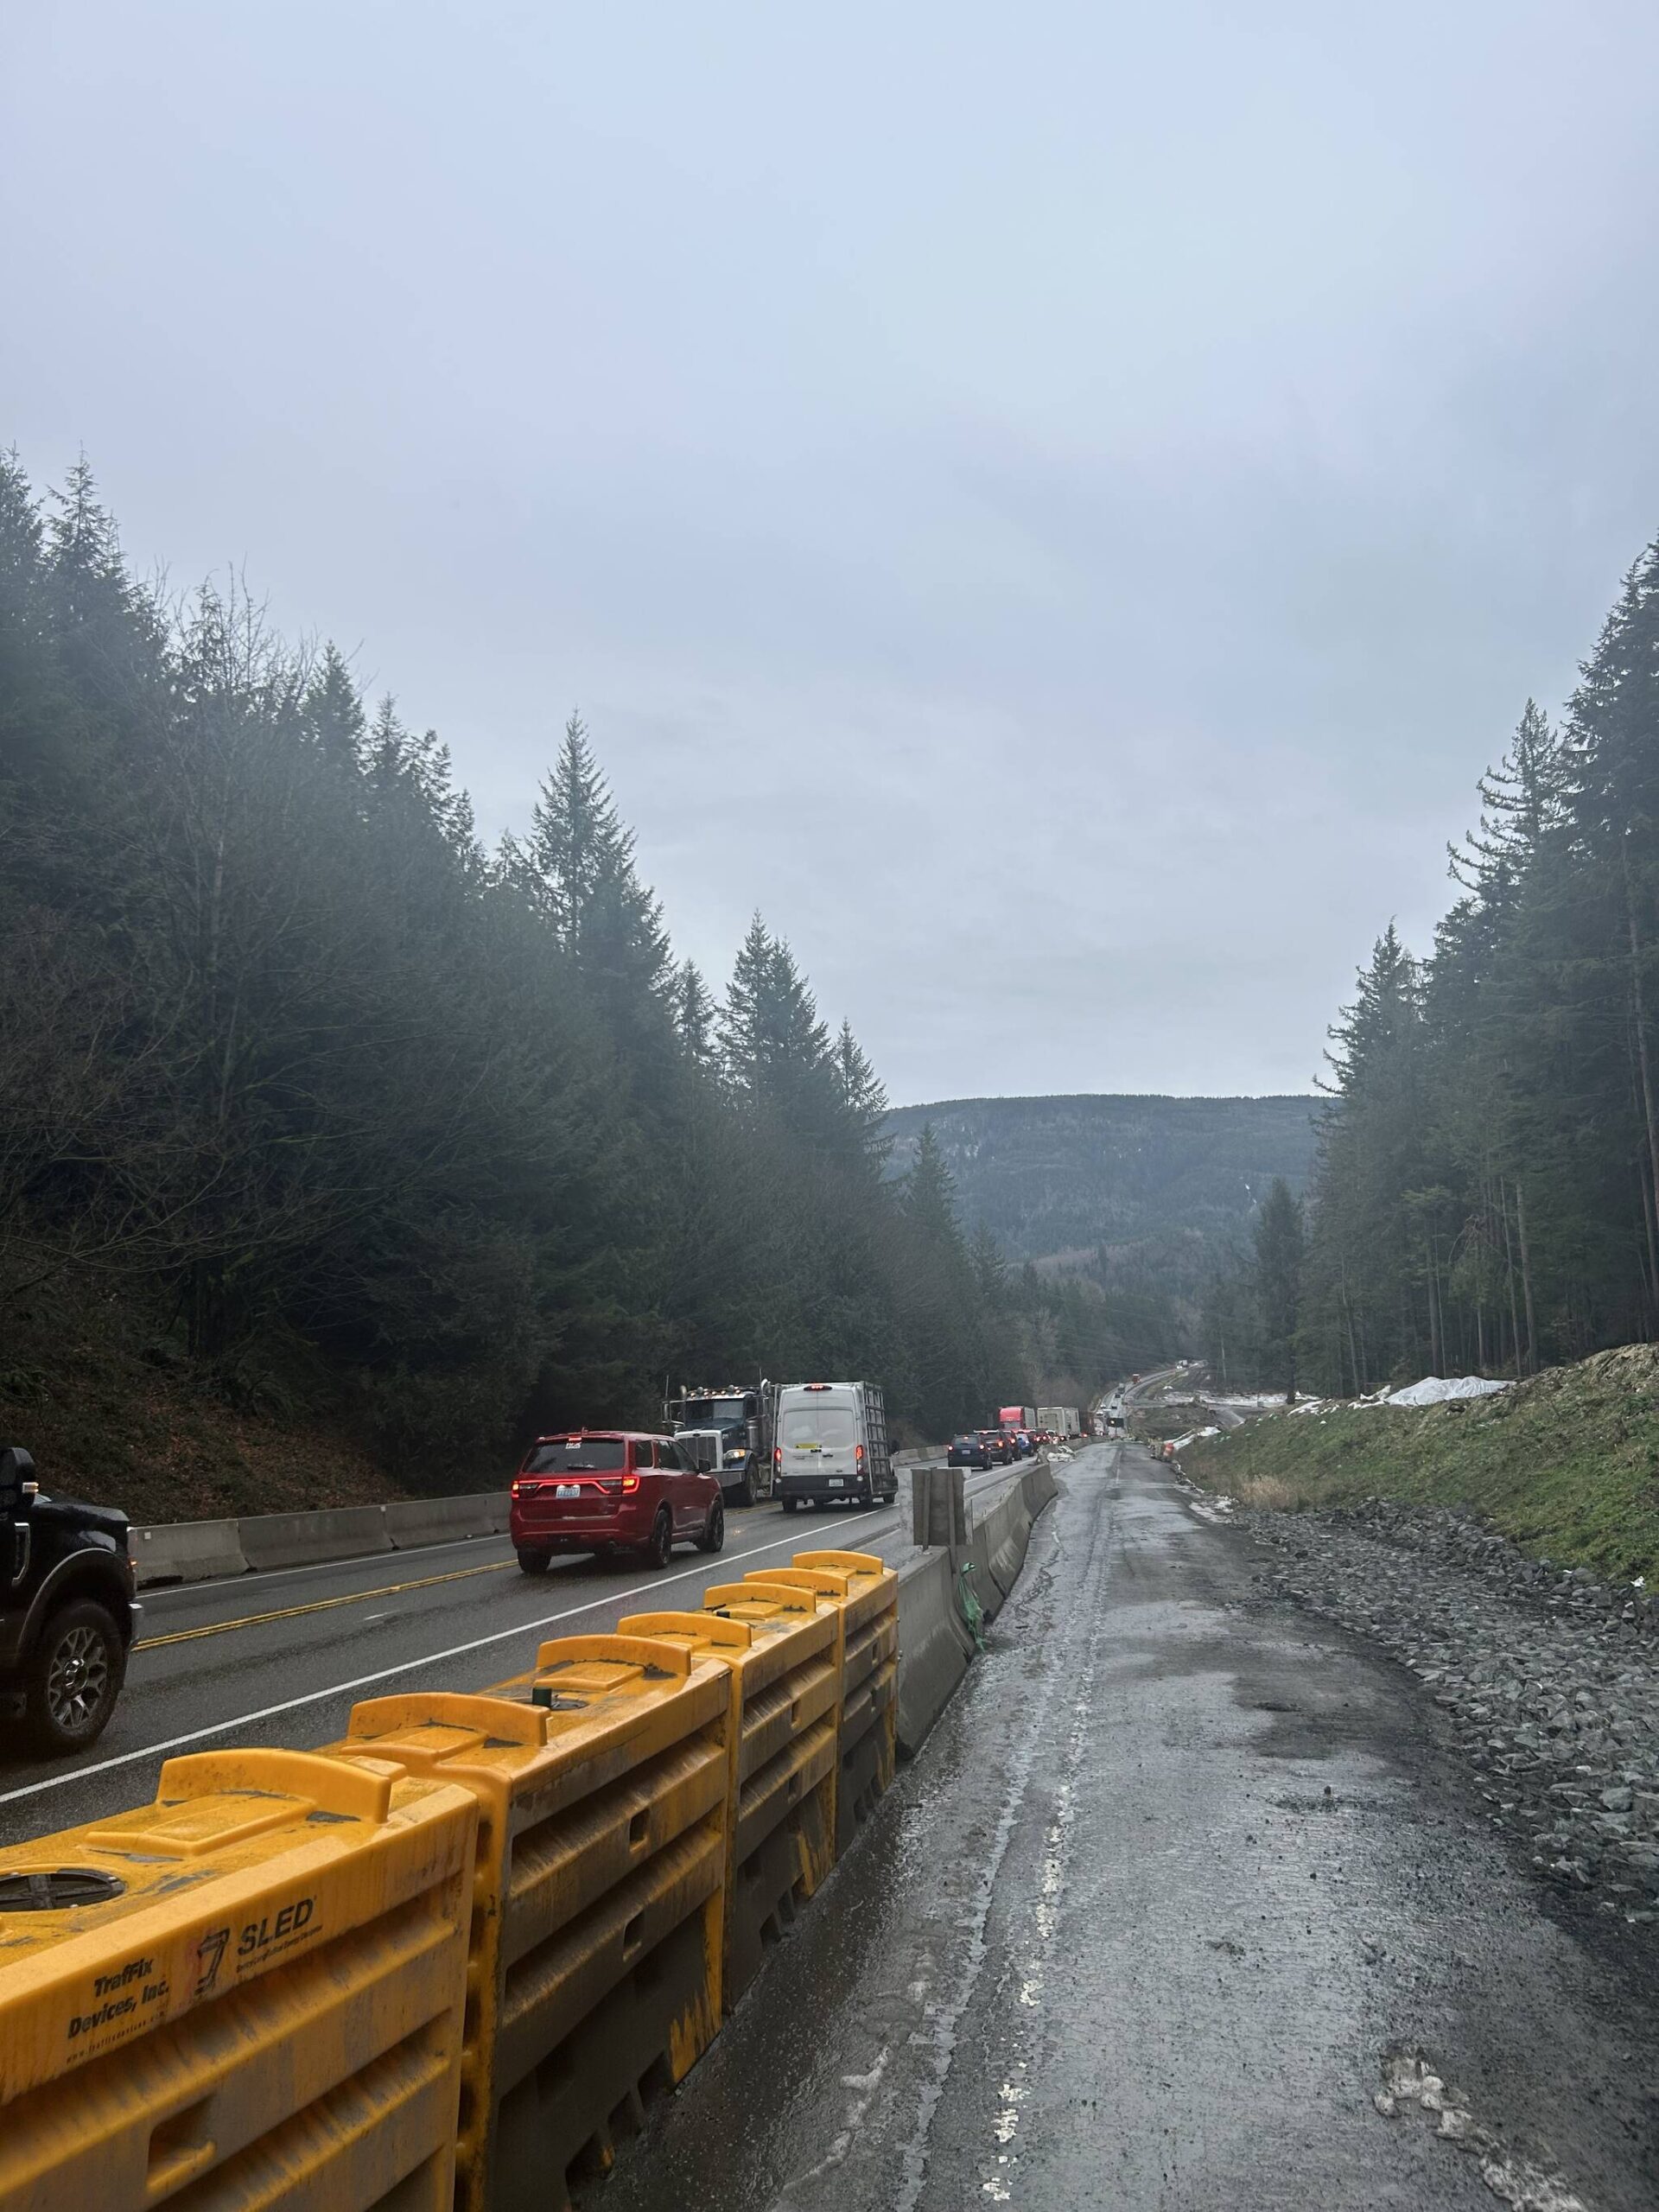 Lane reductions on State Route 18. (Cameron Sires/Sound Publishing)